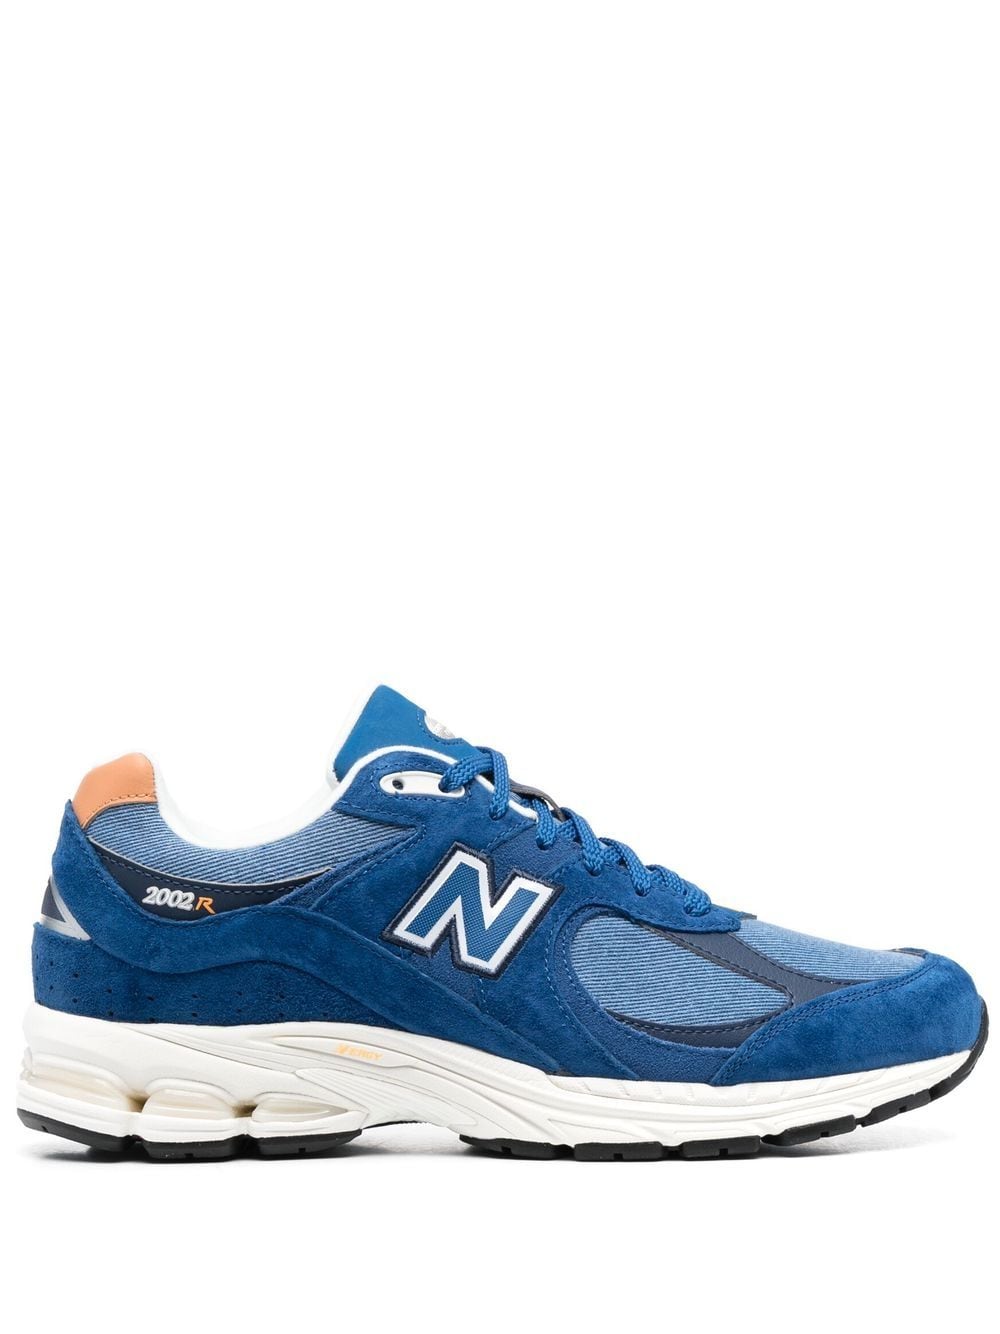 New Balance 2002R low-top sneakers - Blue